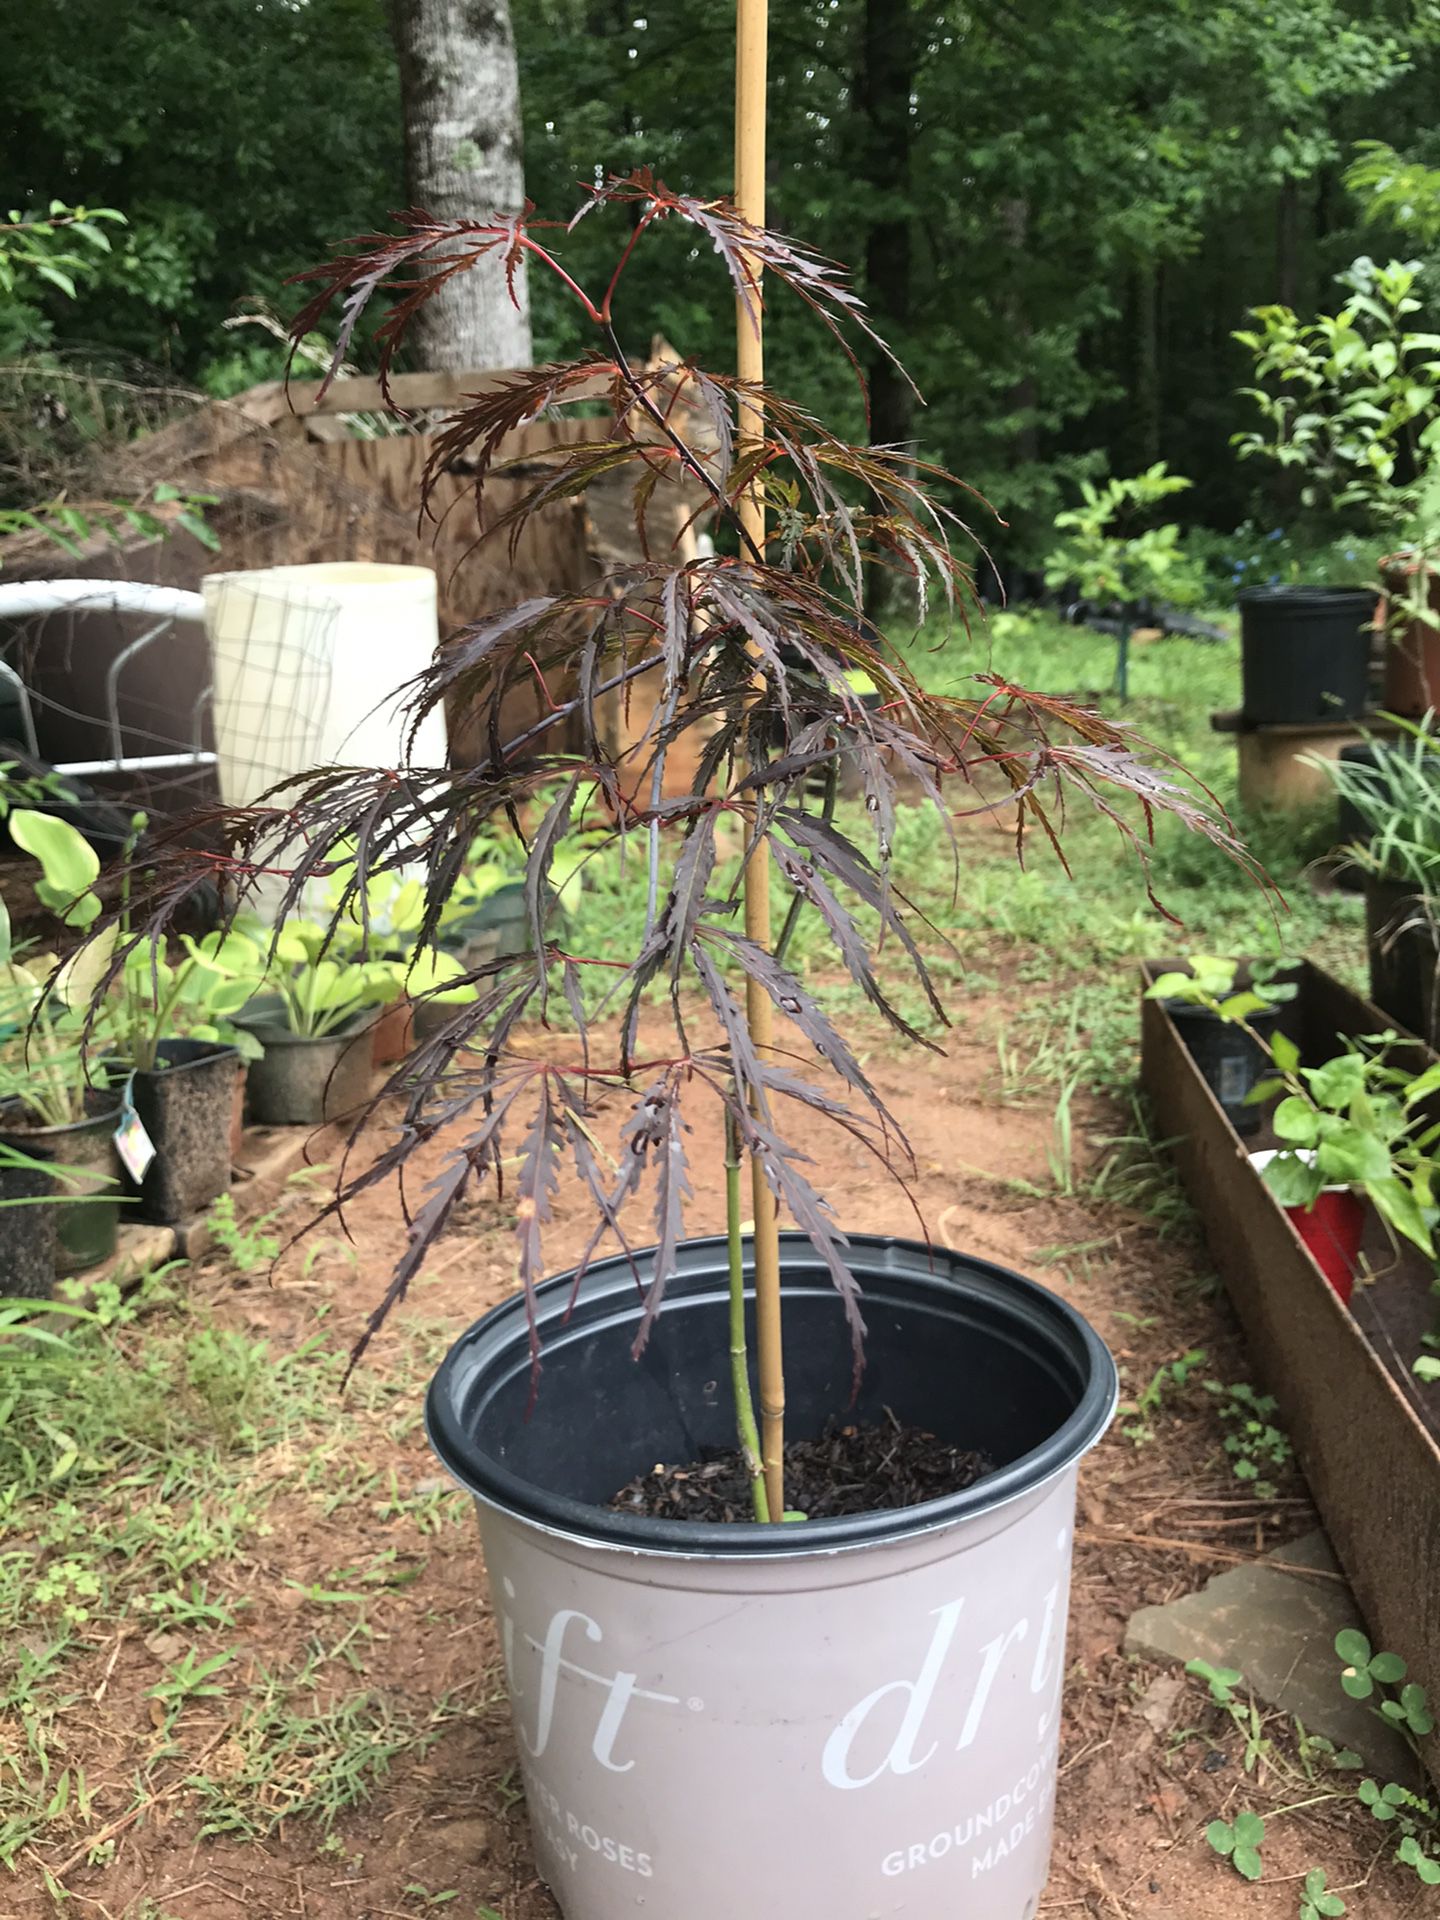 Japanese maple rare varieties two left each $ 40 firm must pick up in Kennesaw off wade green road price to sell please serious buyers only